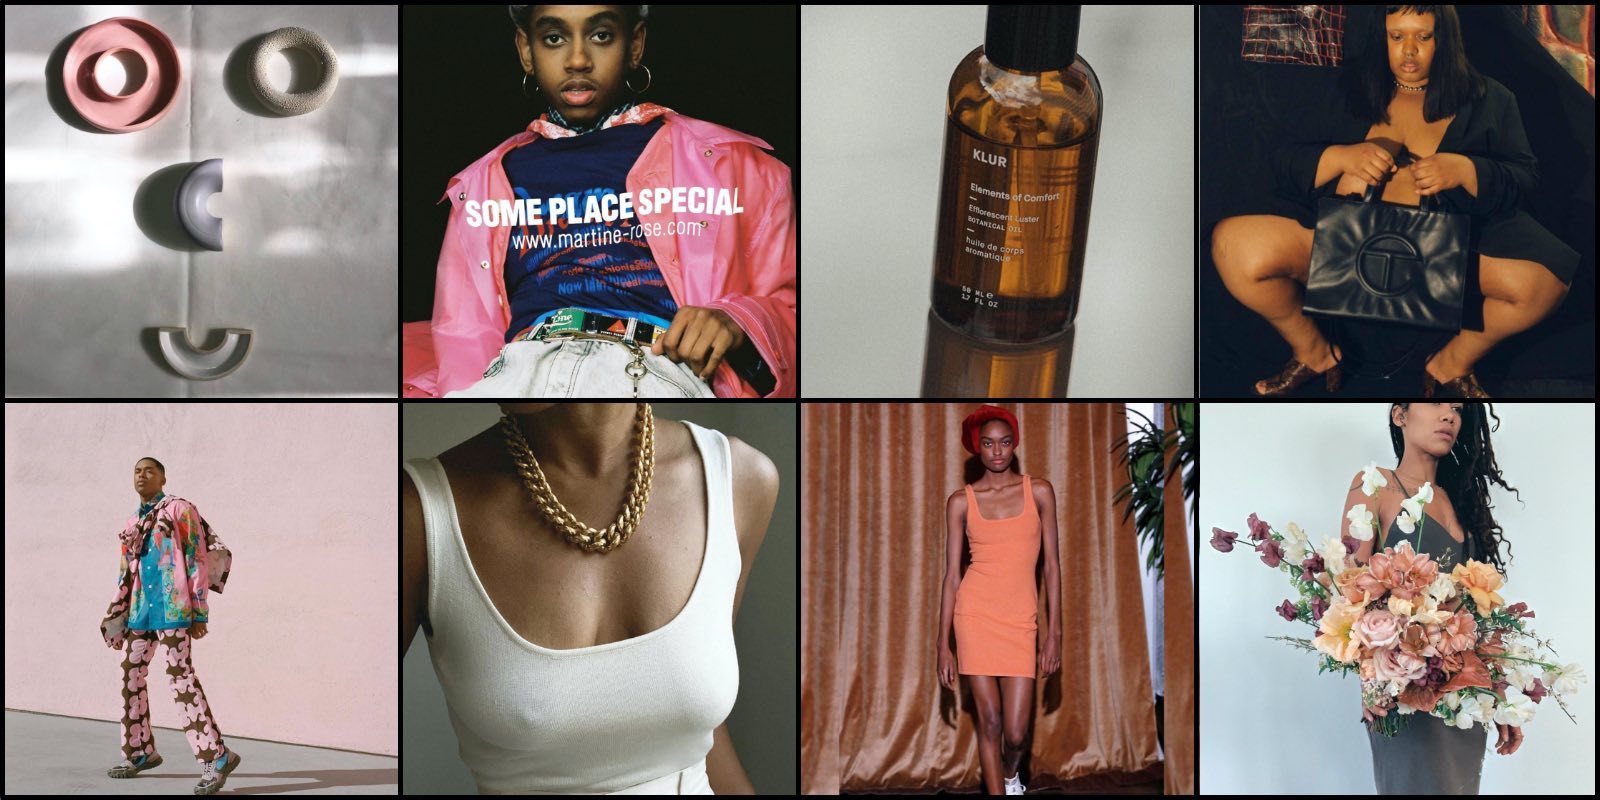 Our round up of Black fashion and design creatives to support right now.